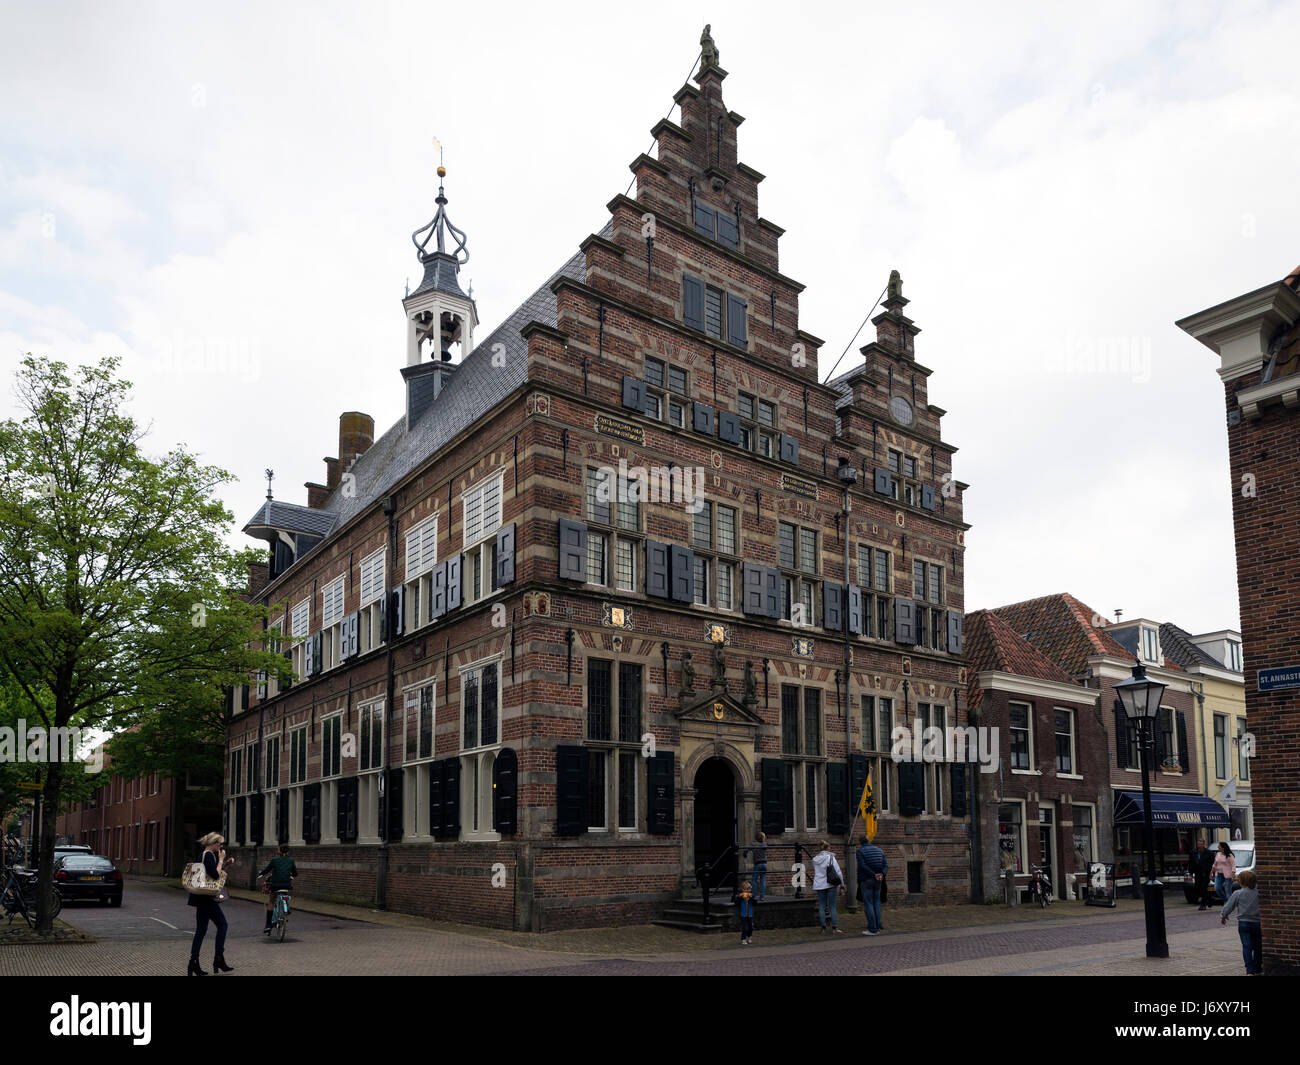 NAARDEN - NETHERLANDS - MAY 13, 2017: Town hall at Naarden. It is a city and former municipality in the Gooi region in the province of North Holland i Stock Photo